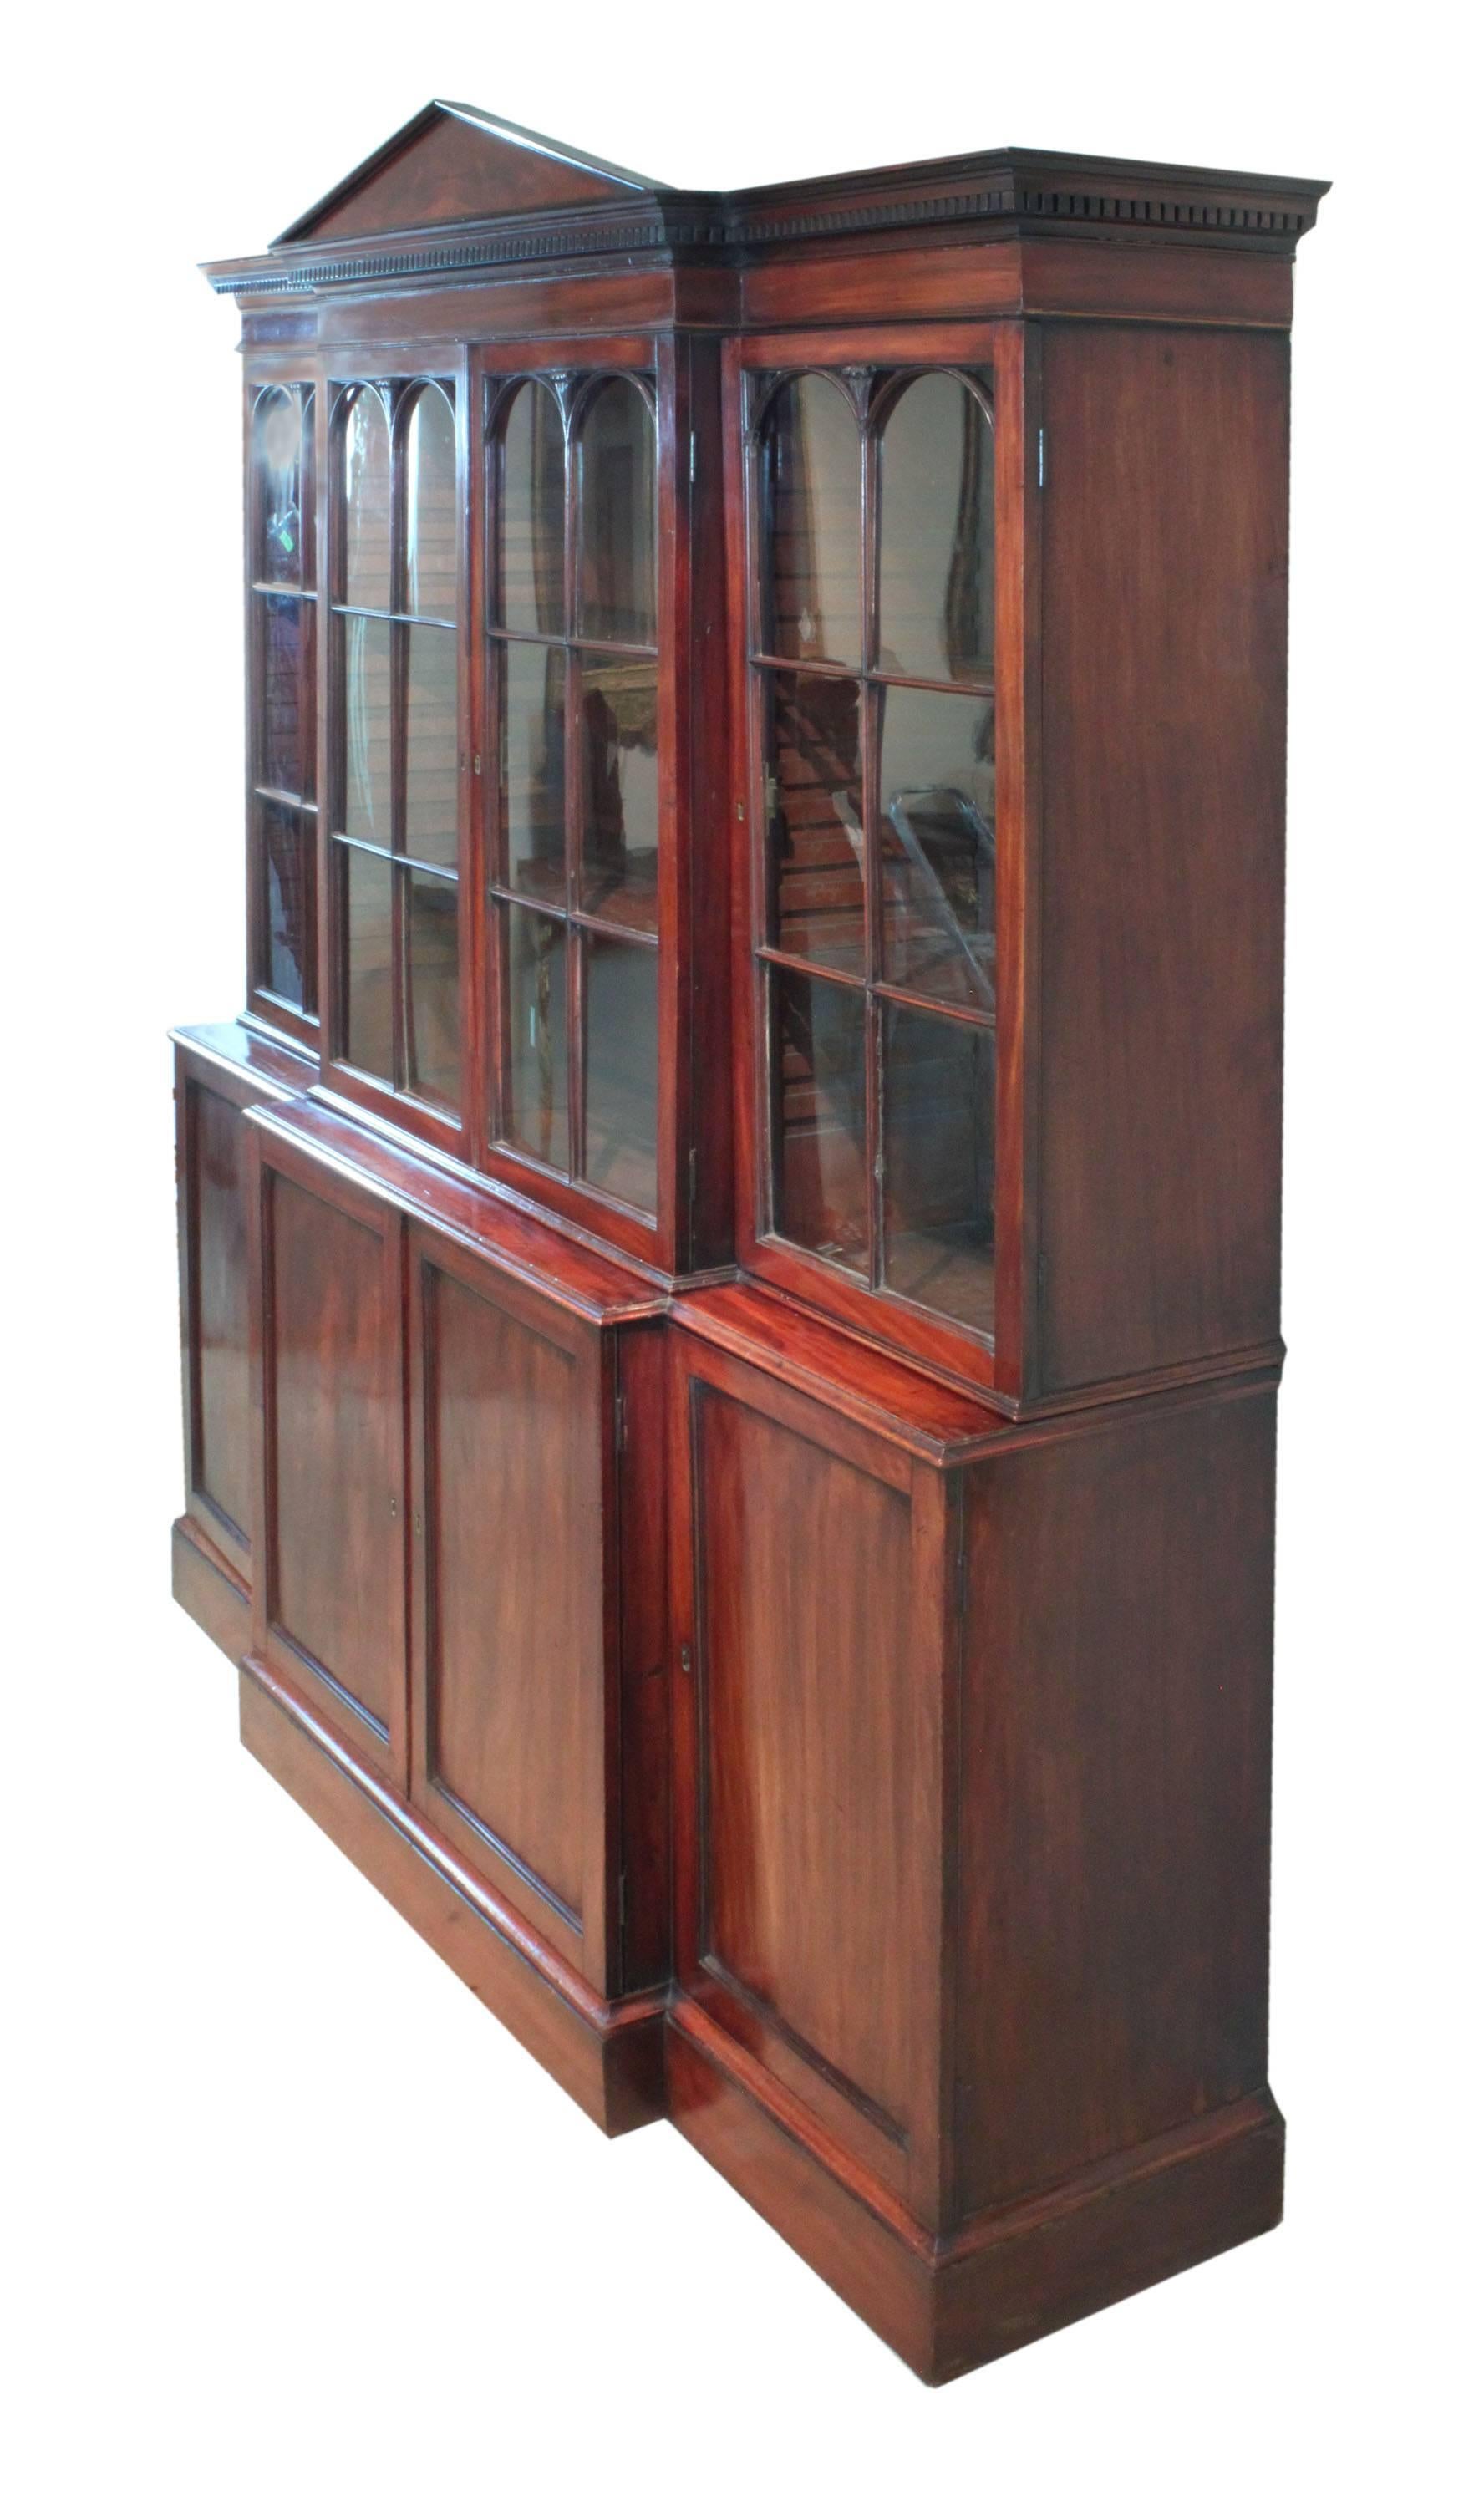 Georgian breakfront bookcase.
A small George III breakfront bookcase in figured mahogany of a good color and patina; the astragal glazed doors with Prince of Wales feathers carved detail, original glass, dentil cornice and good low-waited